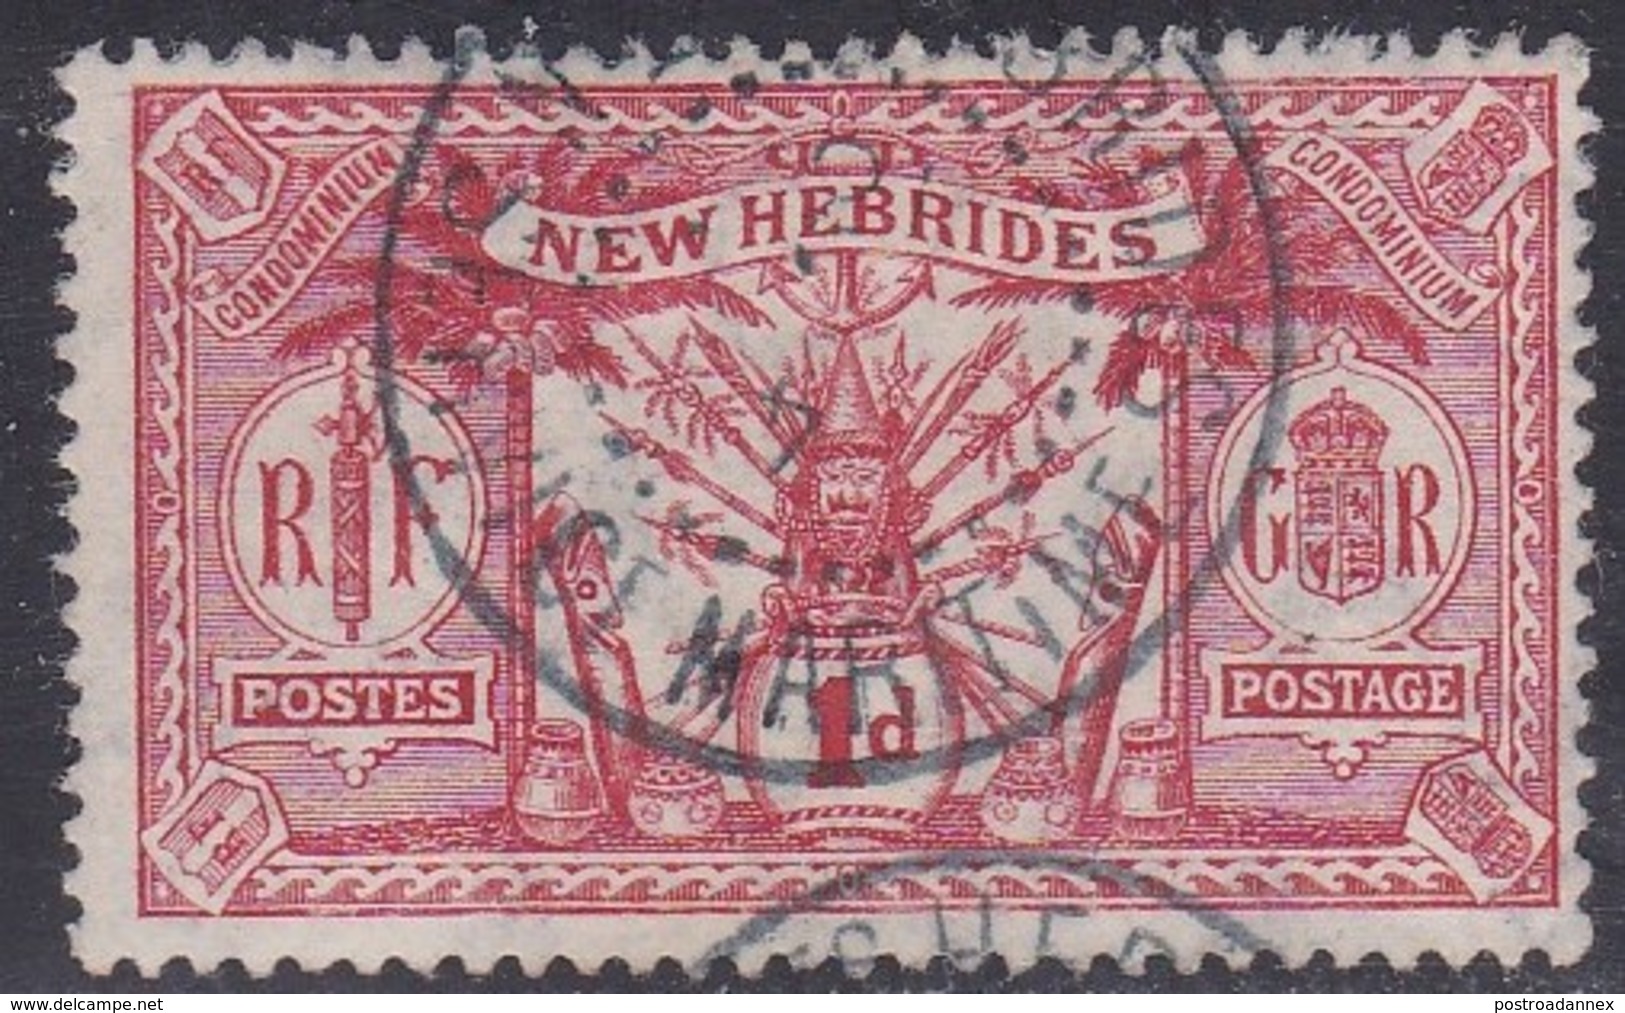 New Hebrides, Scott #18, Used, Idol, Issued 1911 - Used Stamps